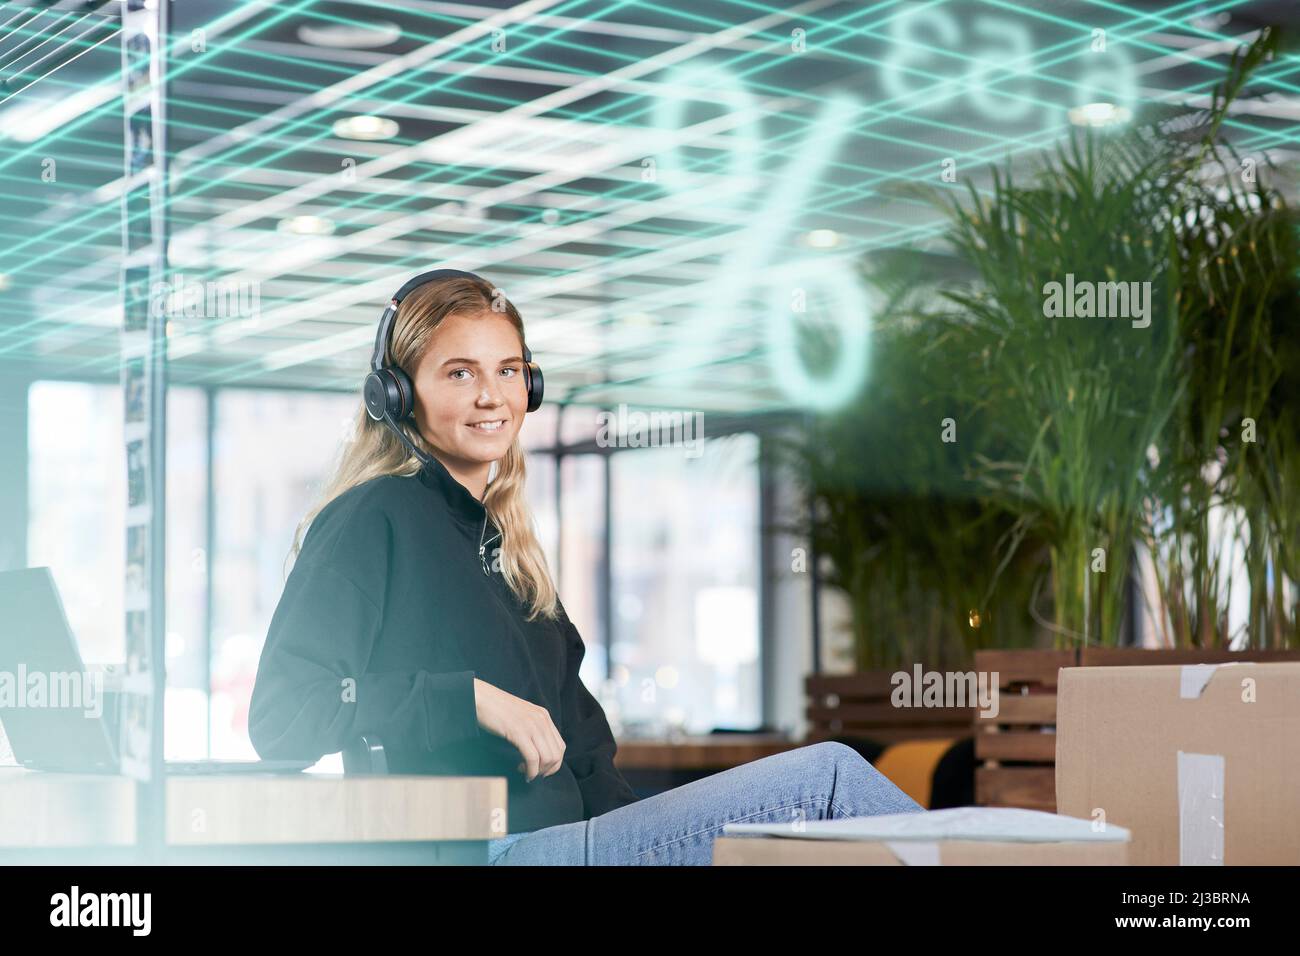 Portrait of smiling young businesswoman in headphones Stock Photo